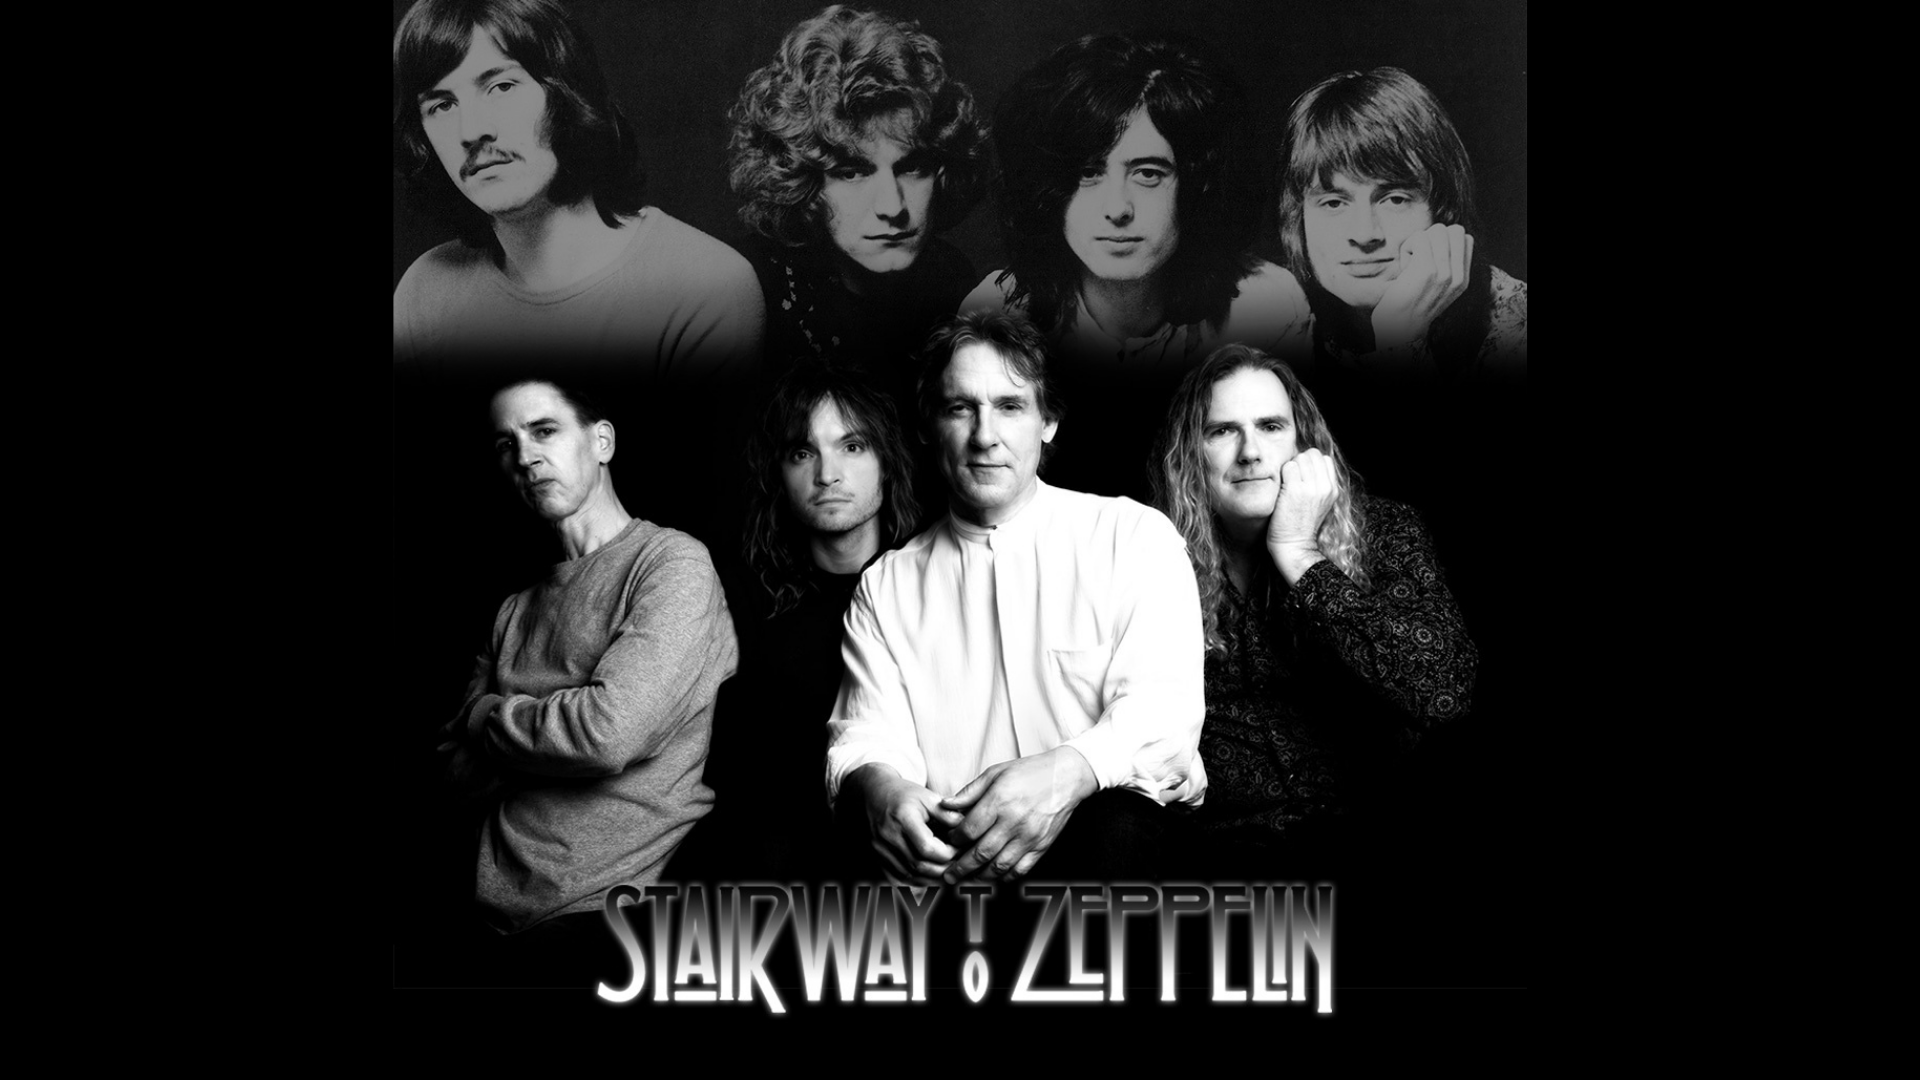 Promo image of Stairway to Zeppelin on Skydeck | Free